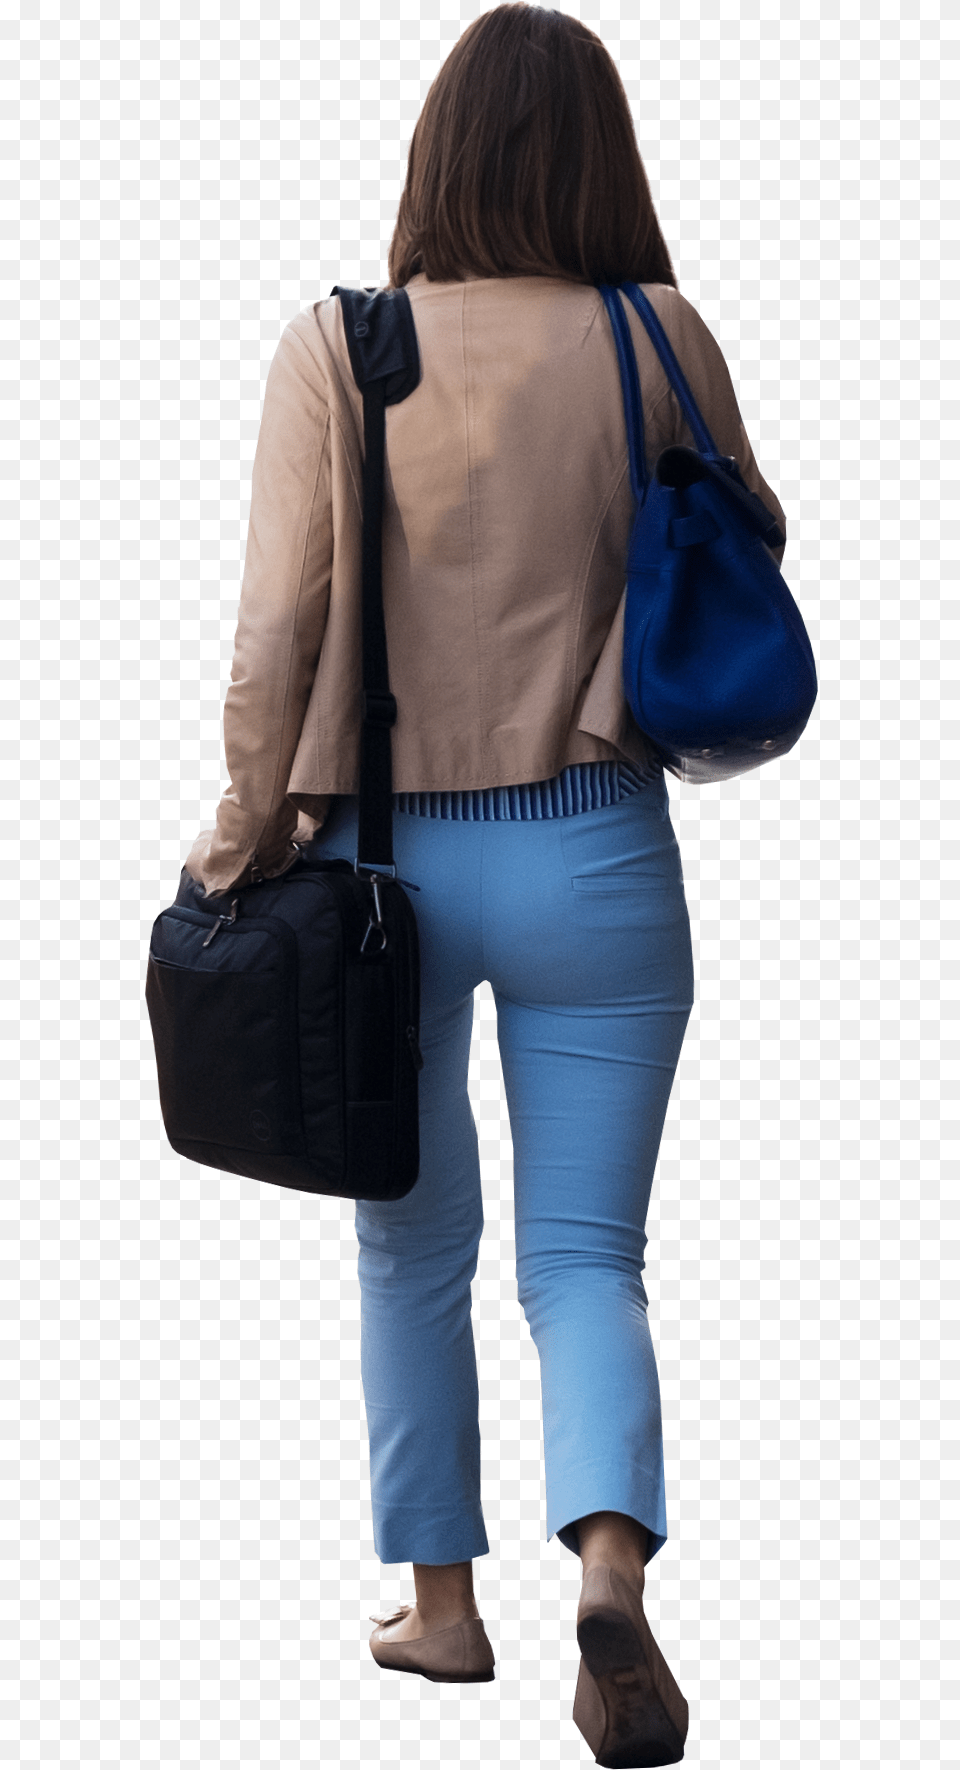 Woman Woman Walking Back, Accessories, Purse, Bag, Clothing Png Image